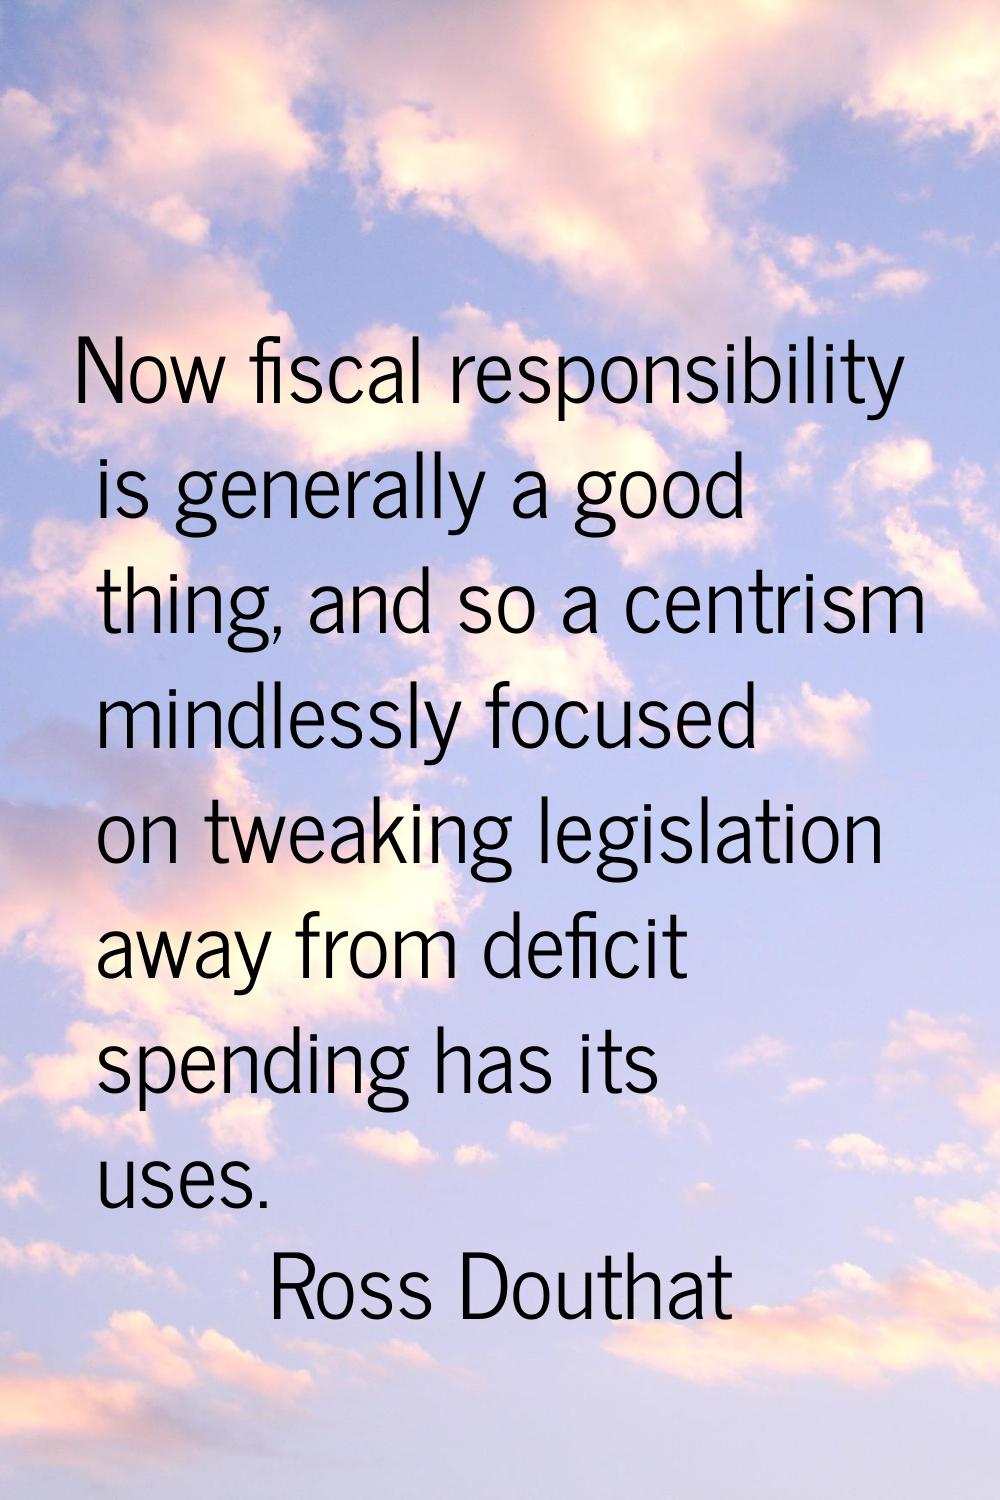 Now fiscal responsibility is generally a good thing, and so a centrism mindlessly focused on tweaki